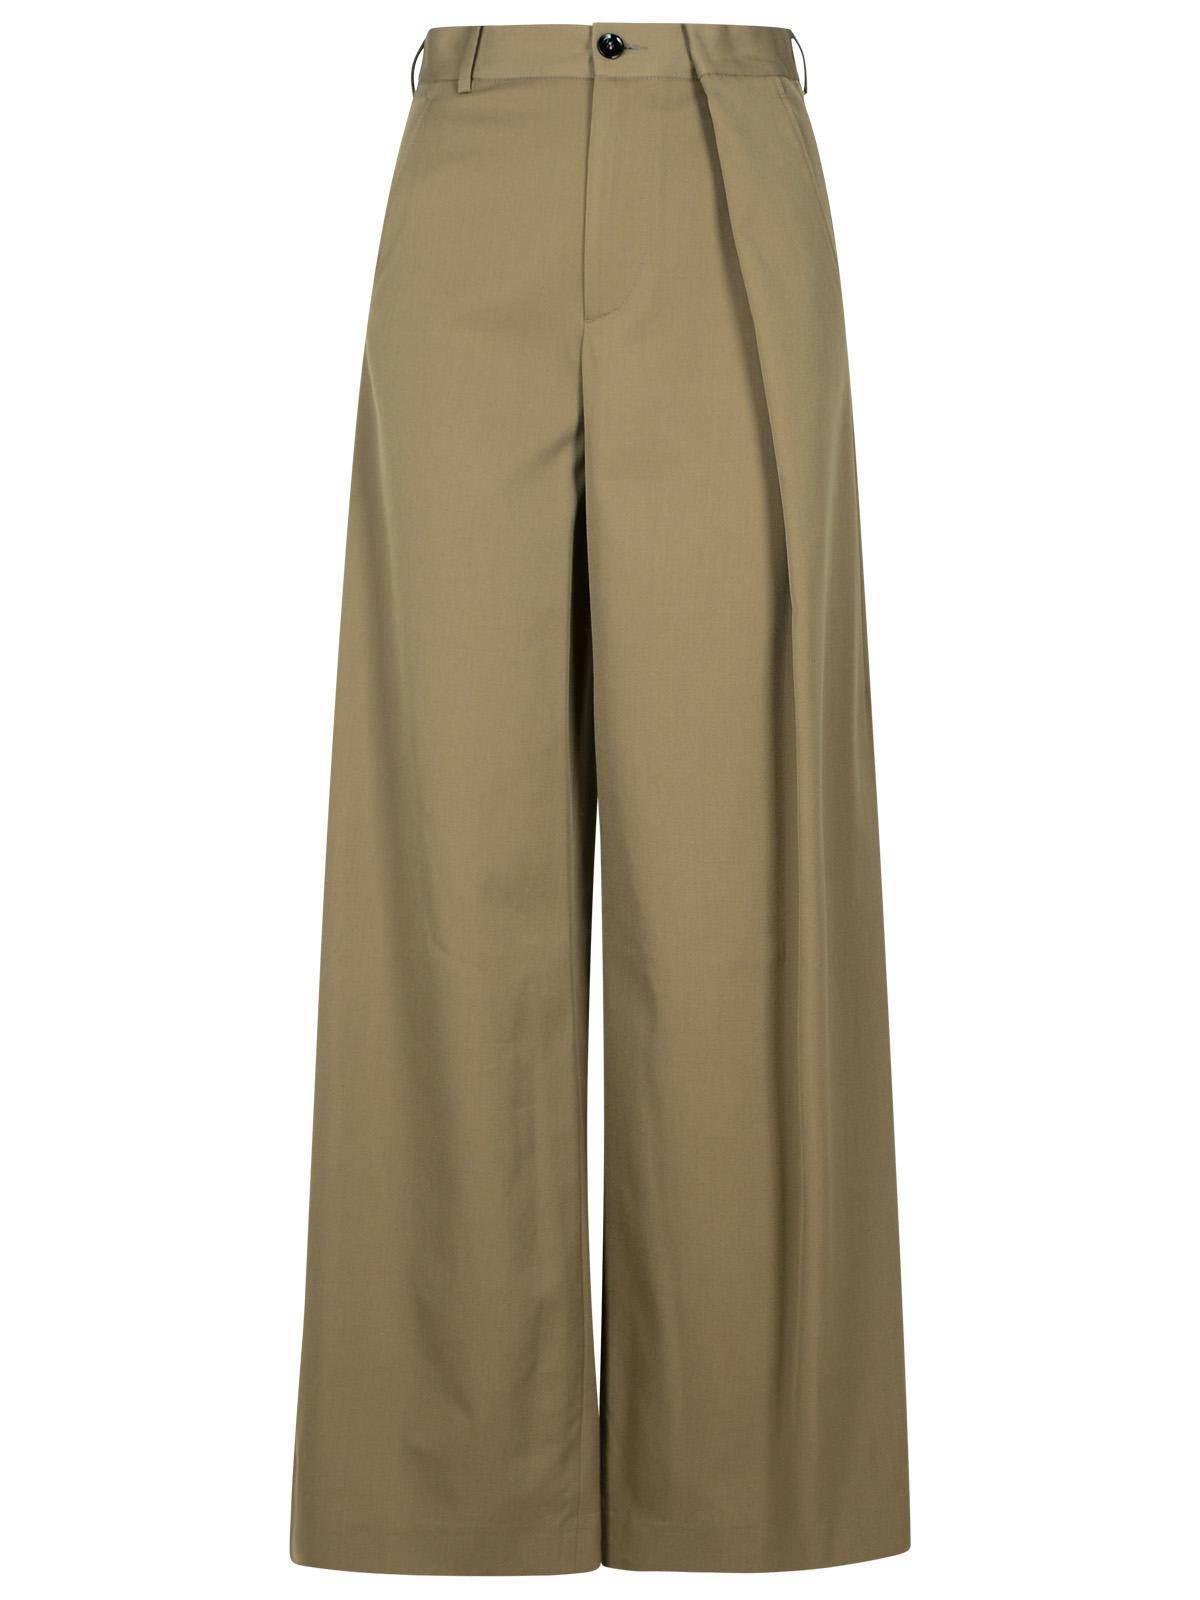 Beige Polyester Blend Trousers